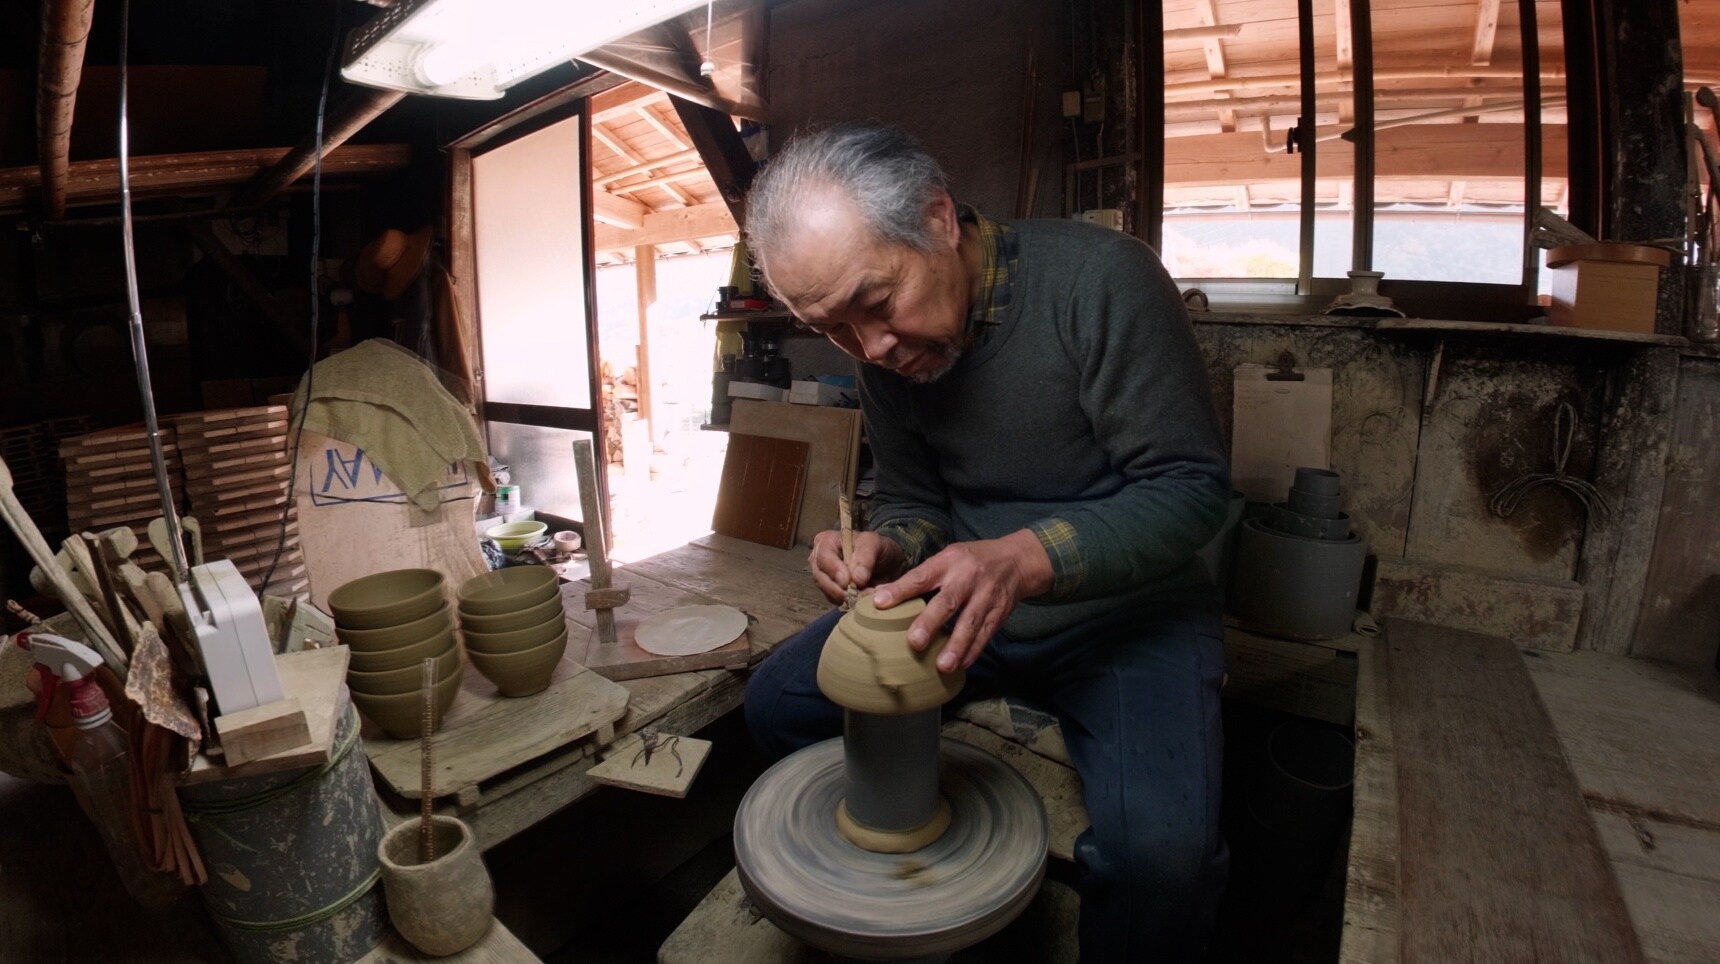 Tottori Folk Crafts: Traditions Passed Down Over Generations